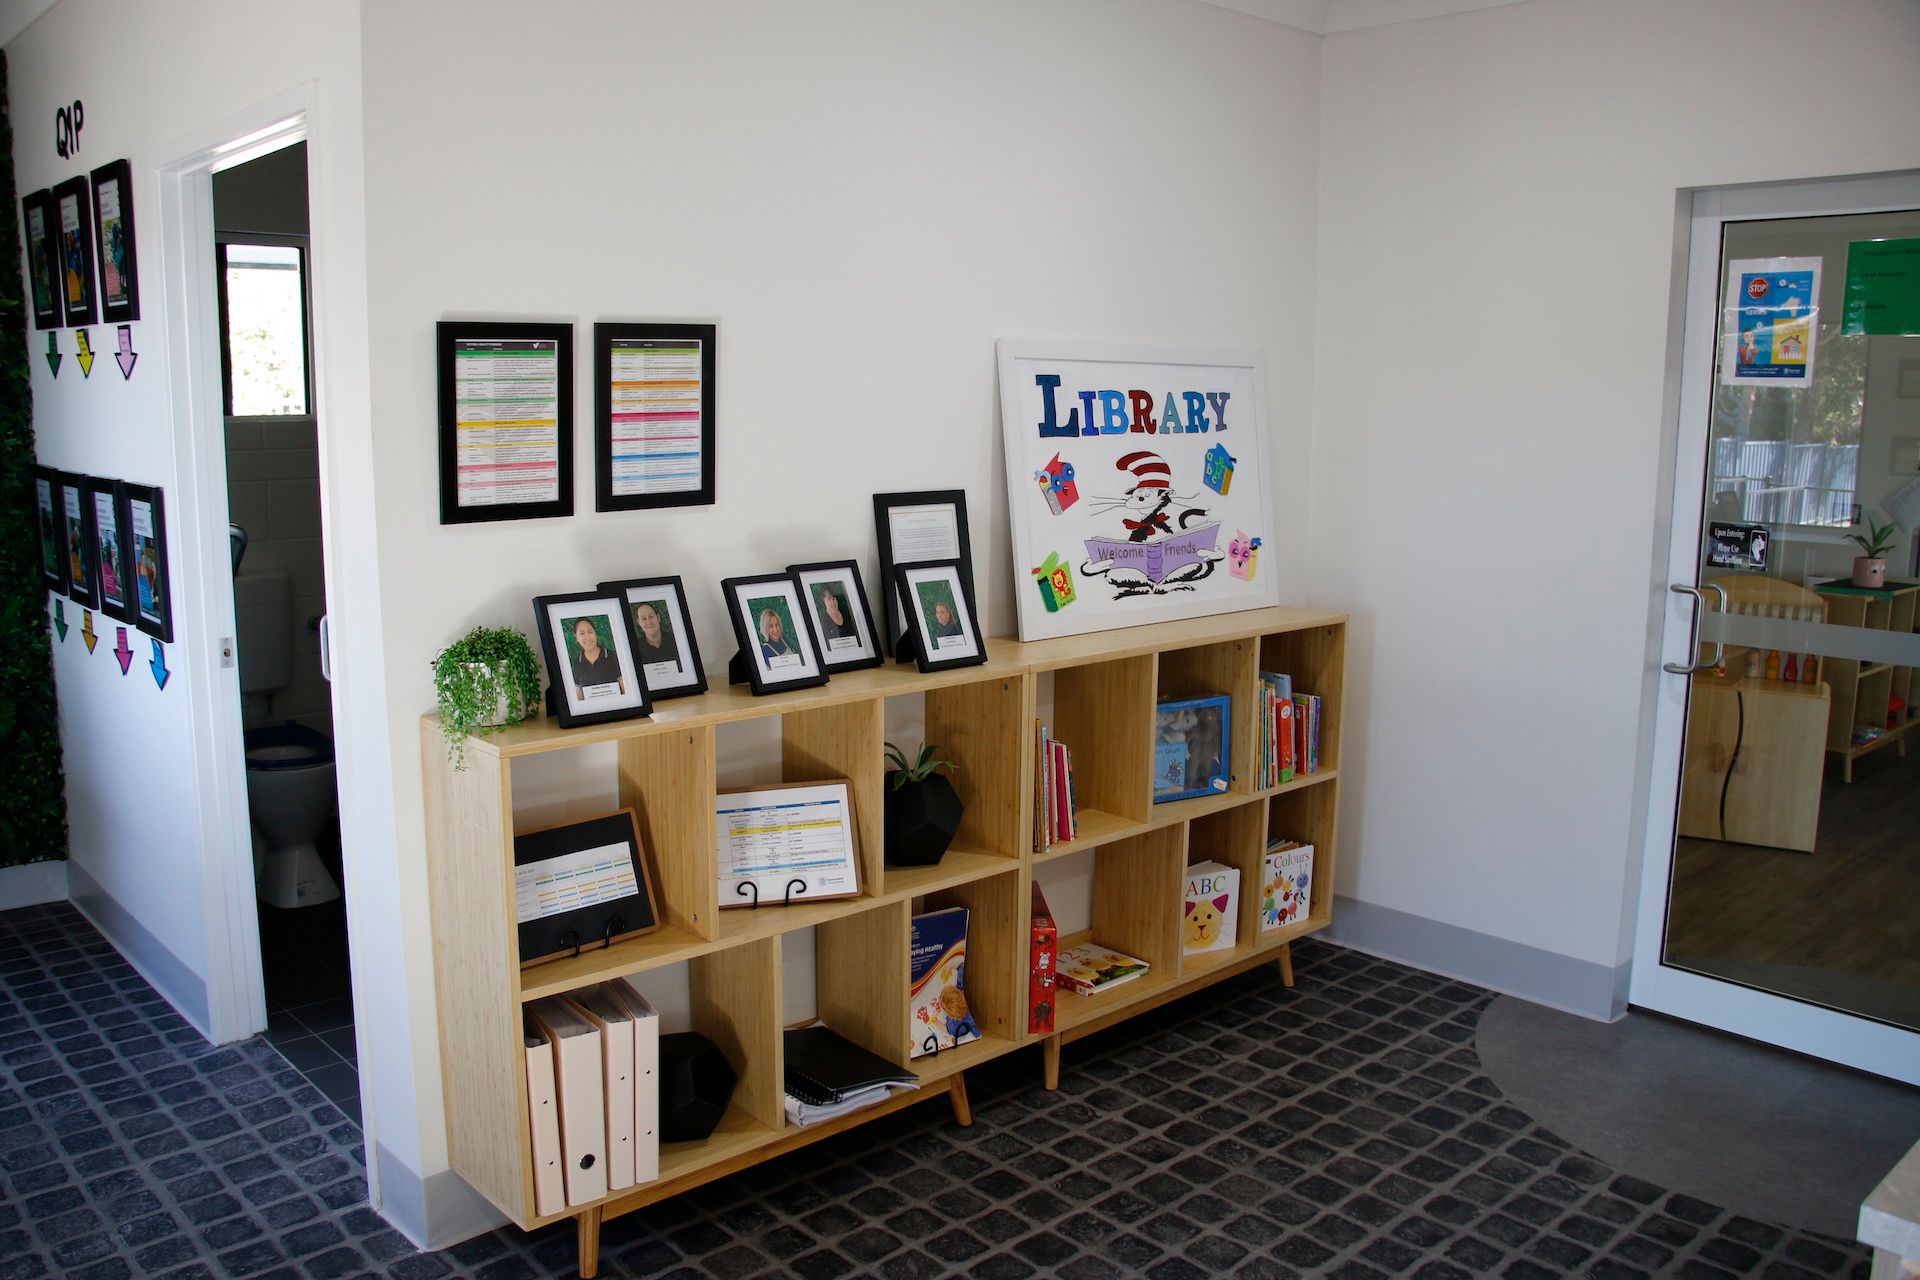 A bookshelf with pictures, certificates and books